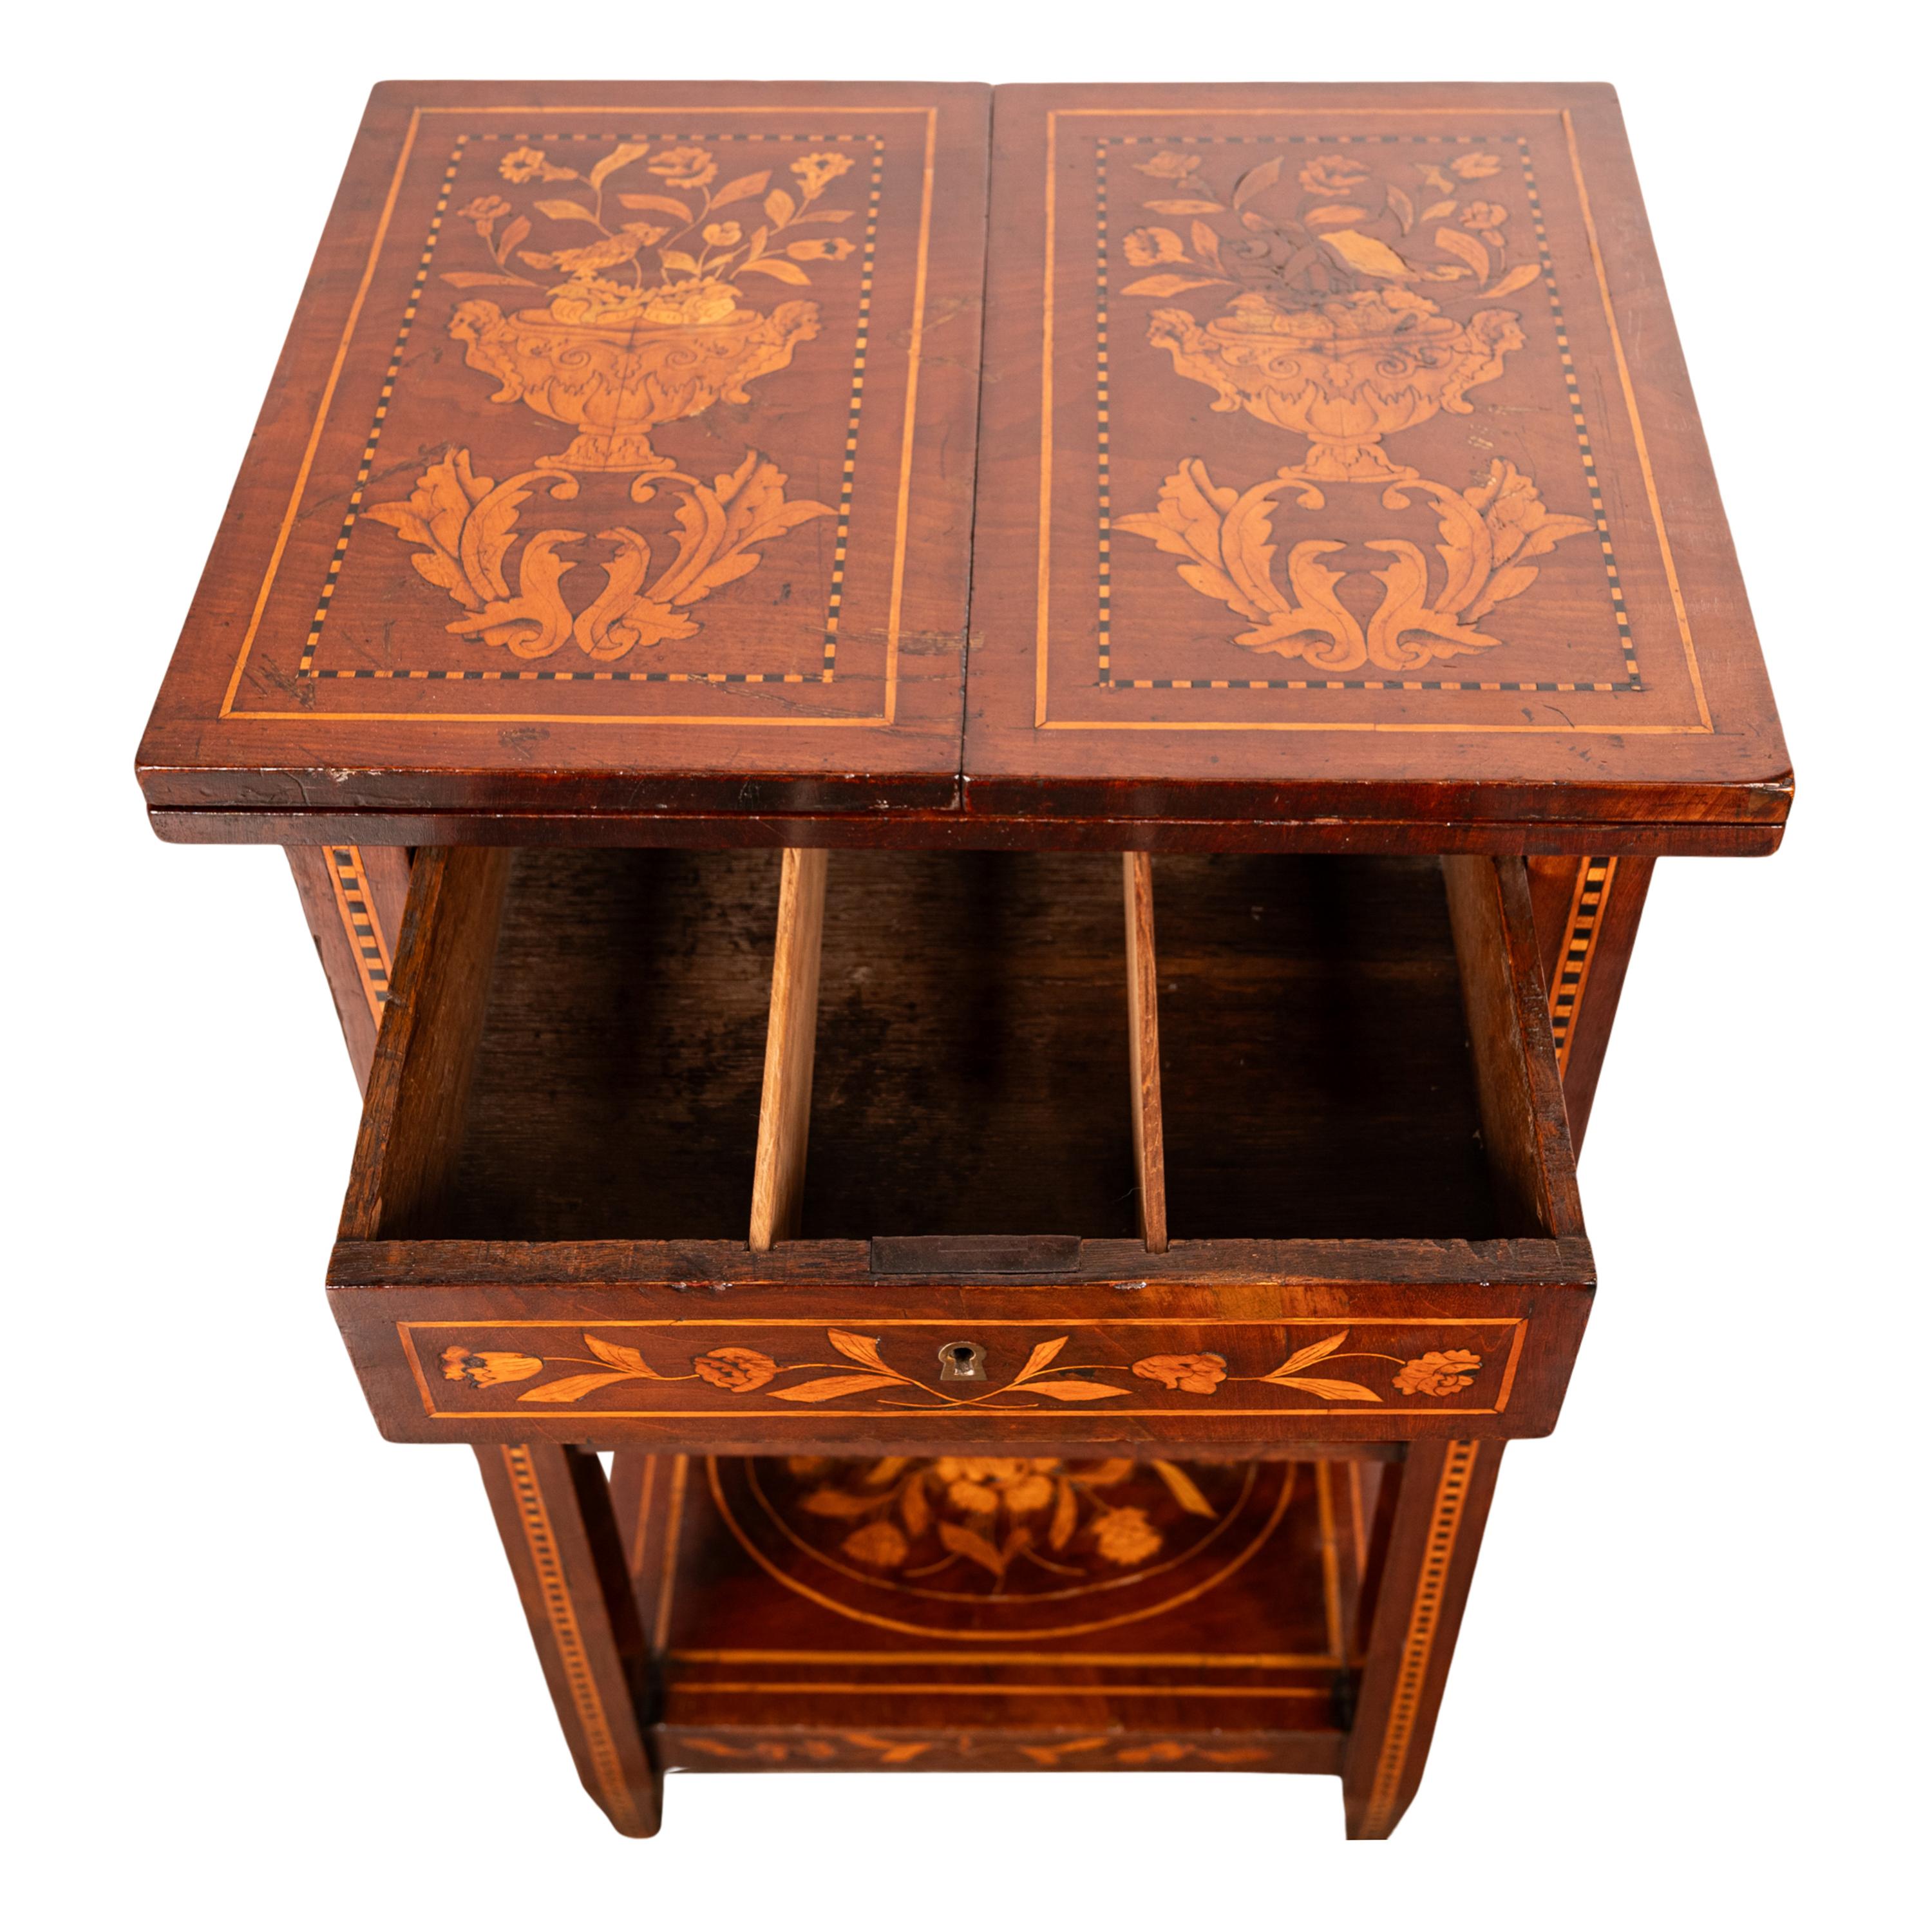 Antique Dutch Georgian Marquetry Foldout Rosewood Satinwood Table Etagere 1820 In Good Condition For Sale In Portland, OR